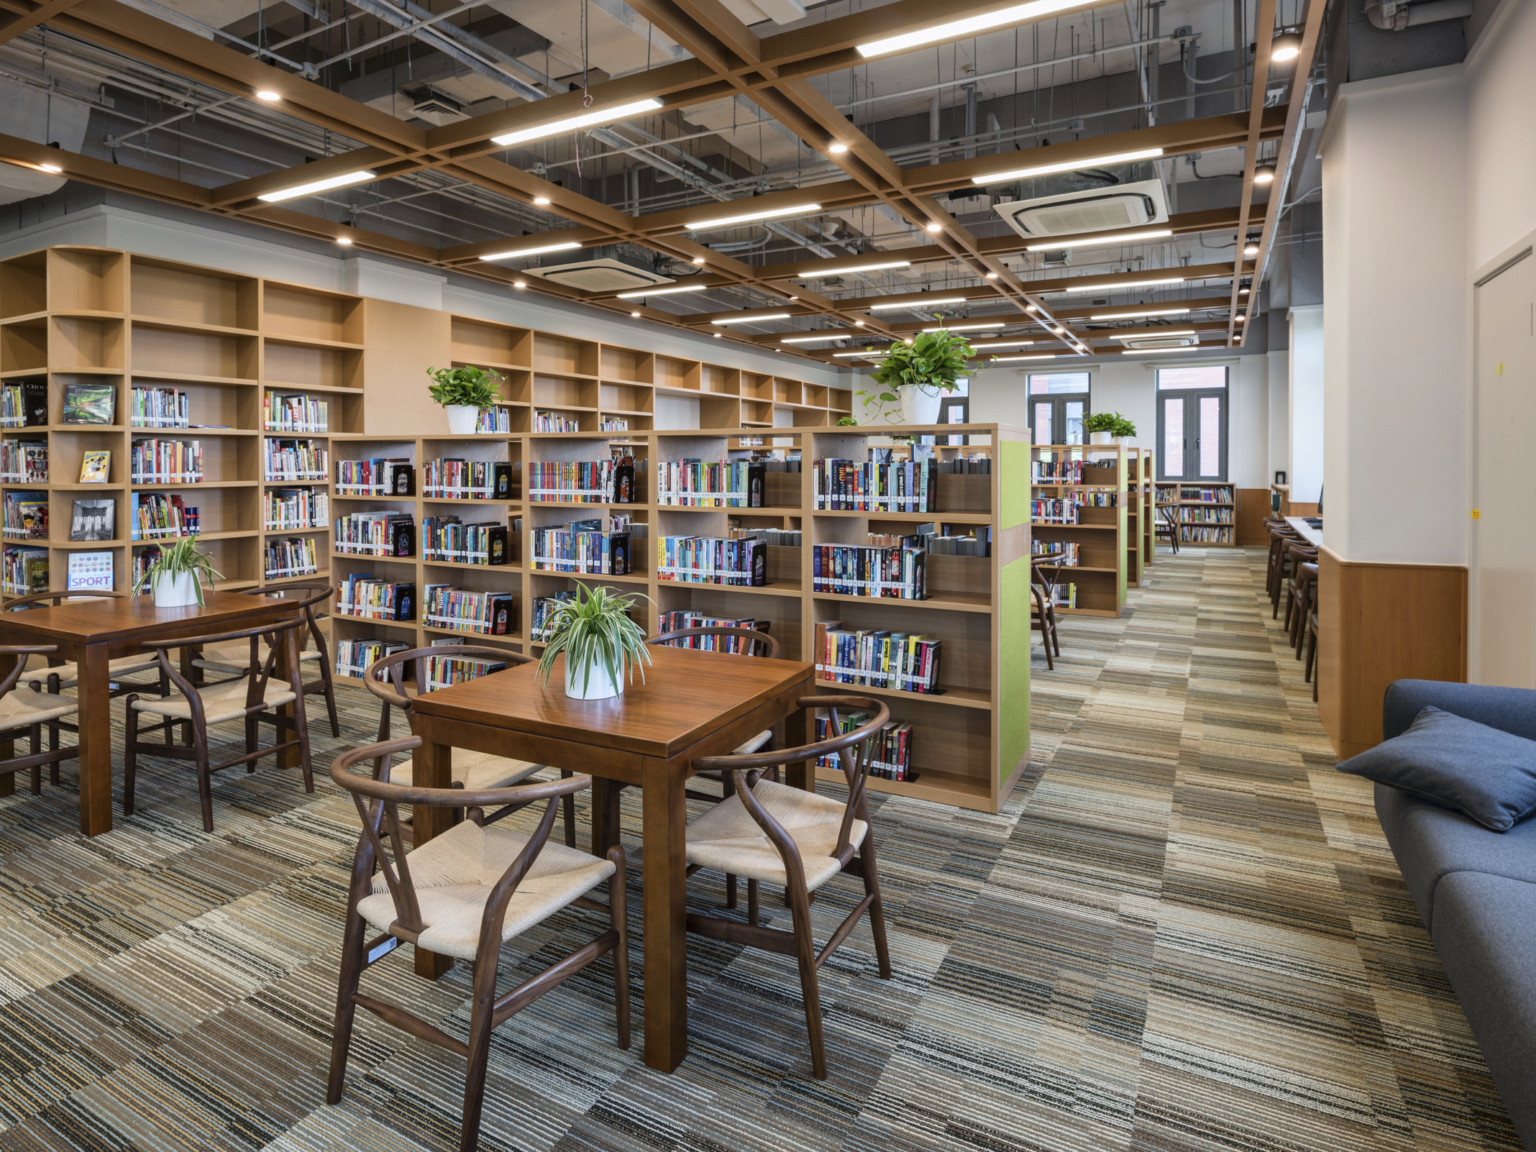 Carpeted library with flexible seating. Exposed pipes behind wood beams with recessed lighting. Wood bookshelves along wall